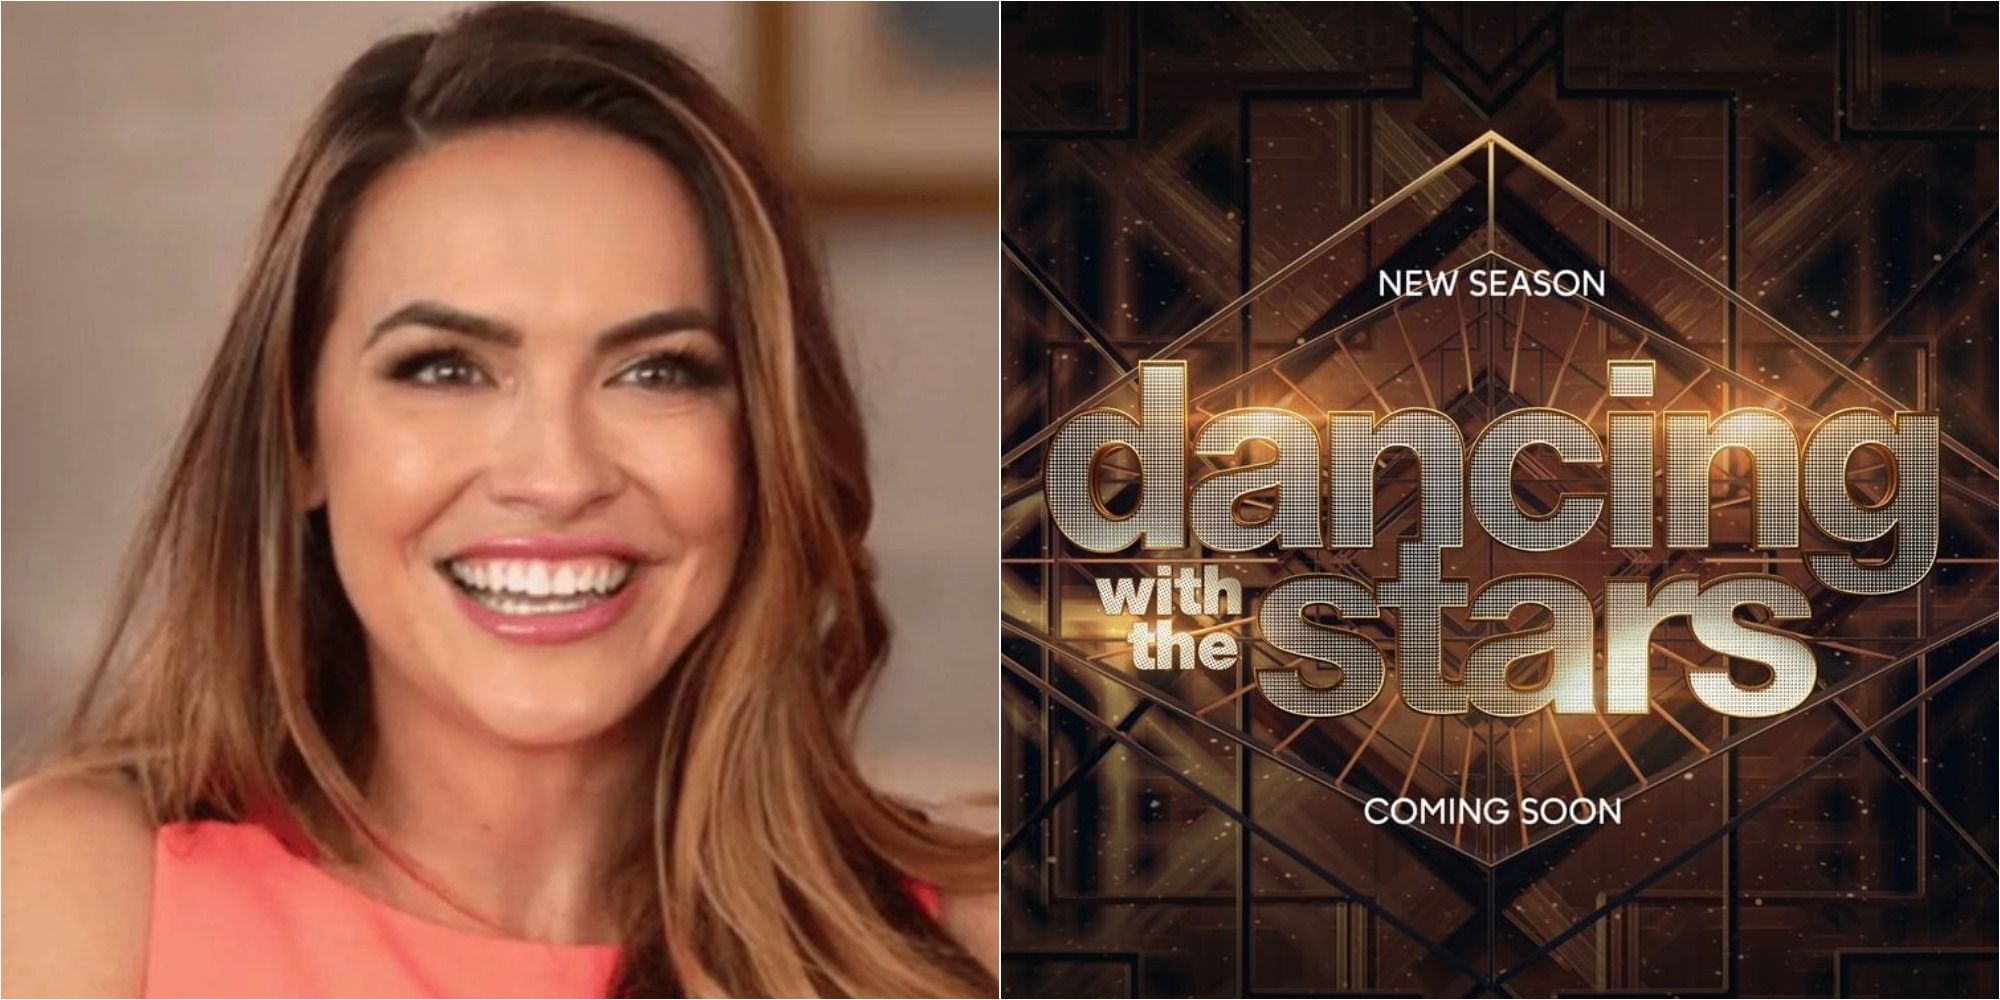 Chrishell Stause from Selling Sunset cast on Dancing With The Stars season 29